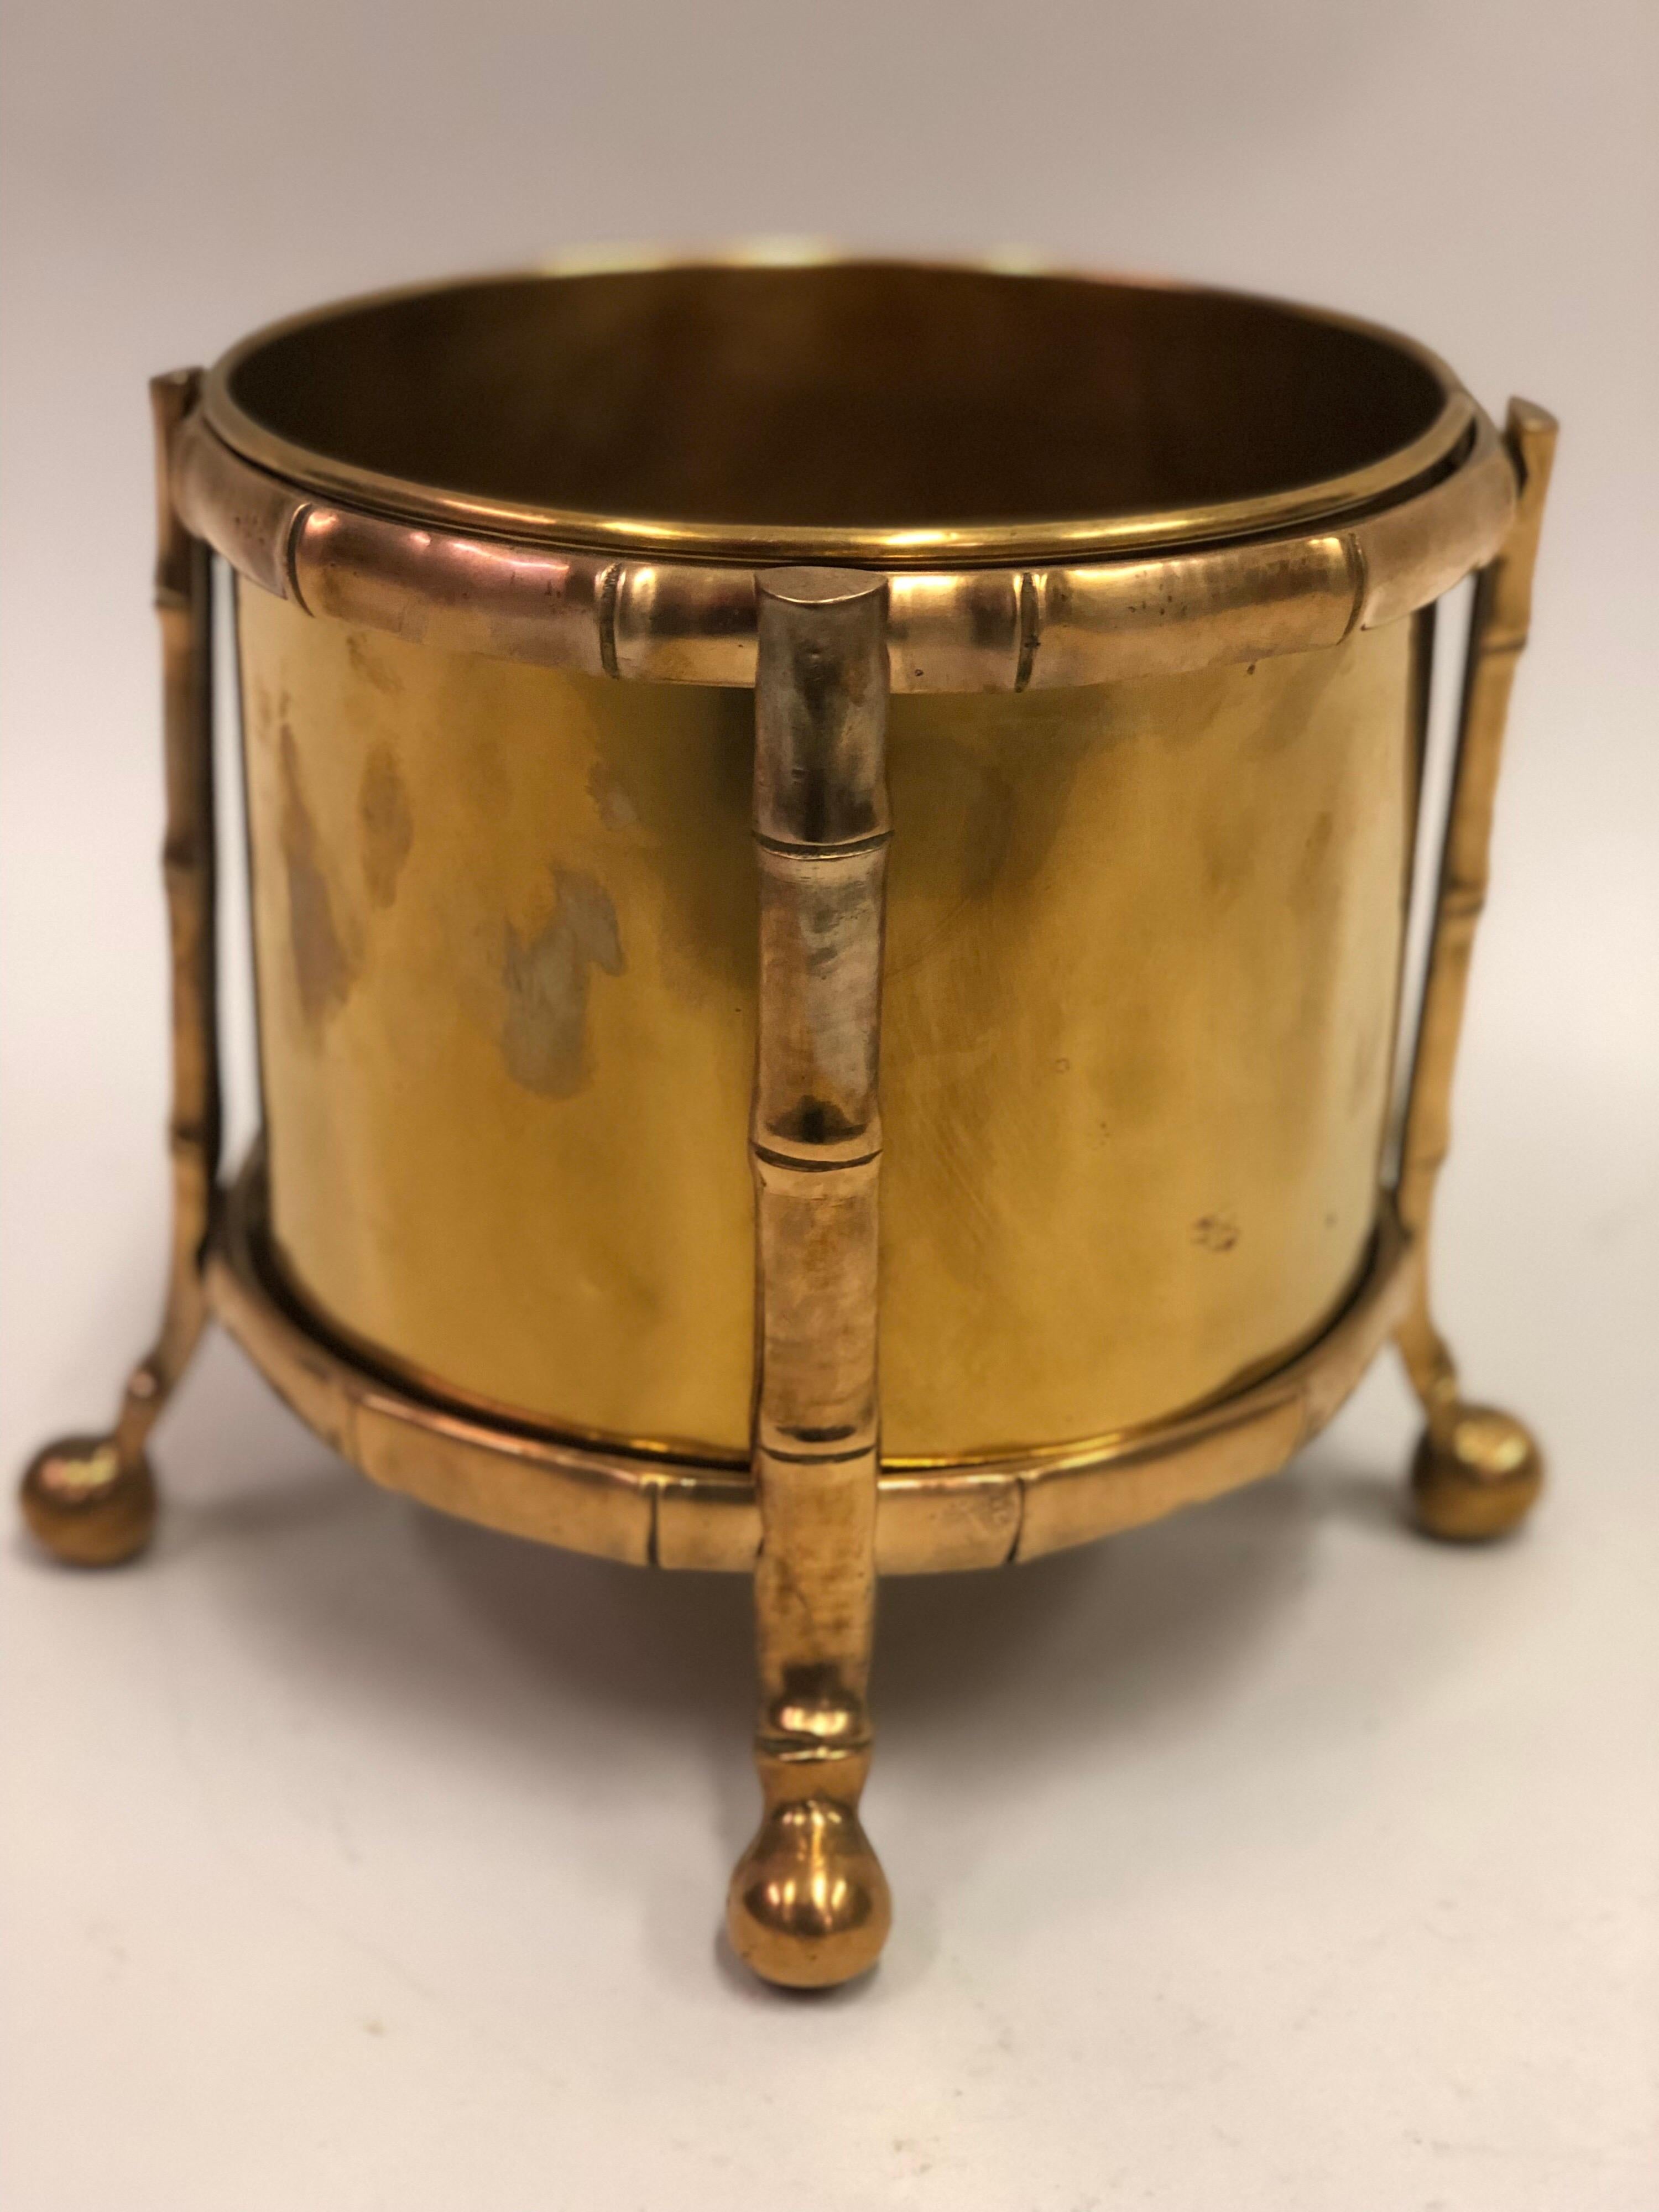 Exquisite, rare French Mid-Century Modern neoclassical bronze and brass waste basket by Maison Baguès. 

The piece is composed of a delicately cast bronze/brass frame in faux bamboo with a removable bronze basket / can that sets into the frame.